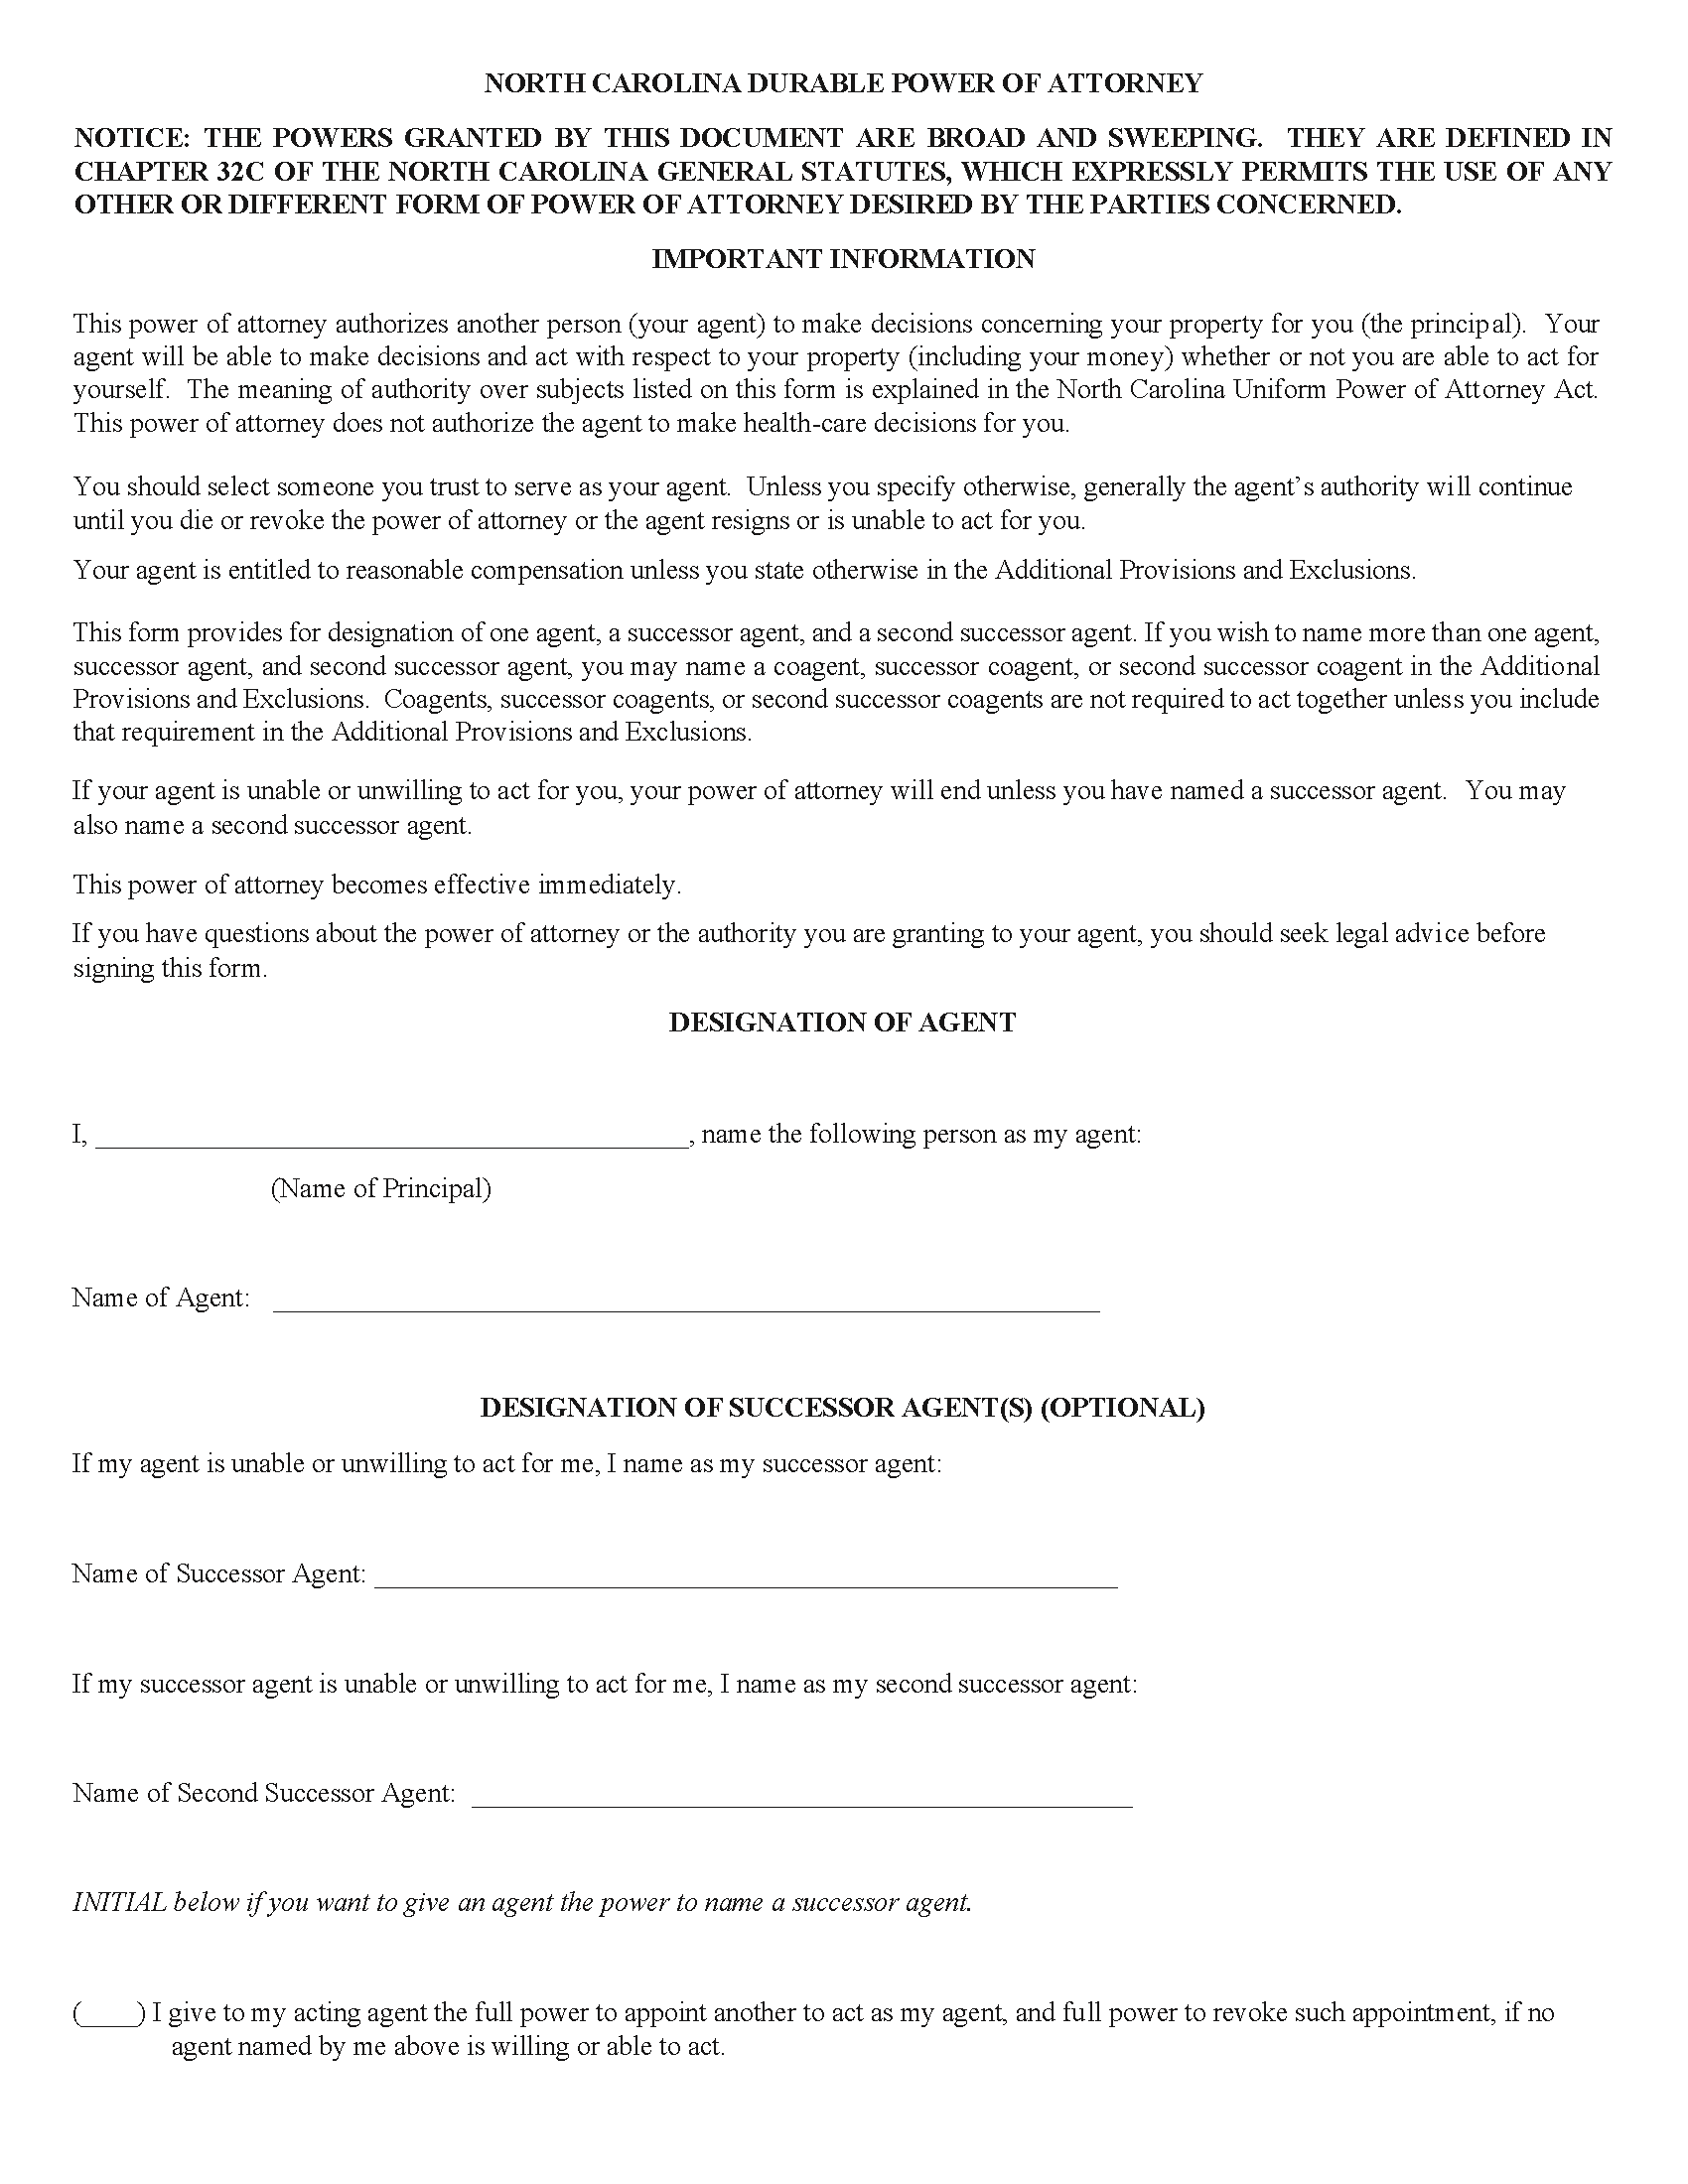 north-carolina-durable-power-of-attorney-form-free-printable-legal-forms